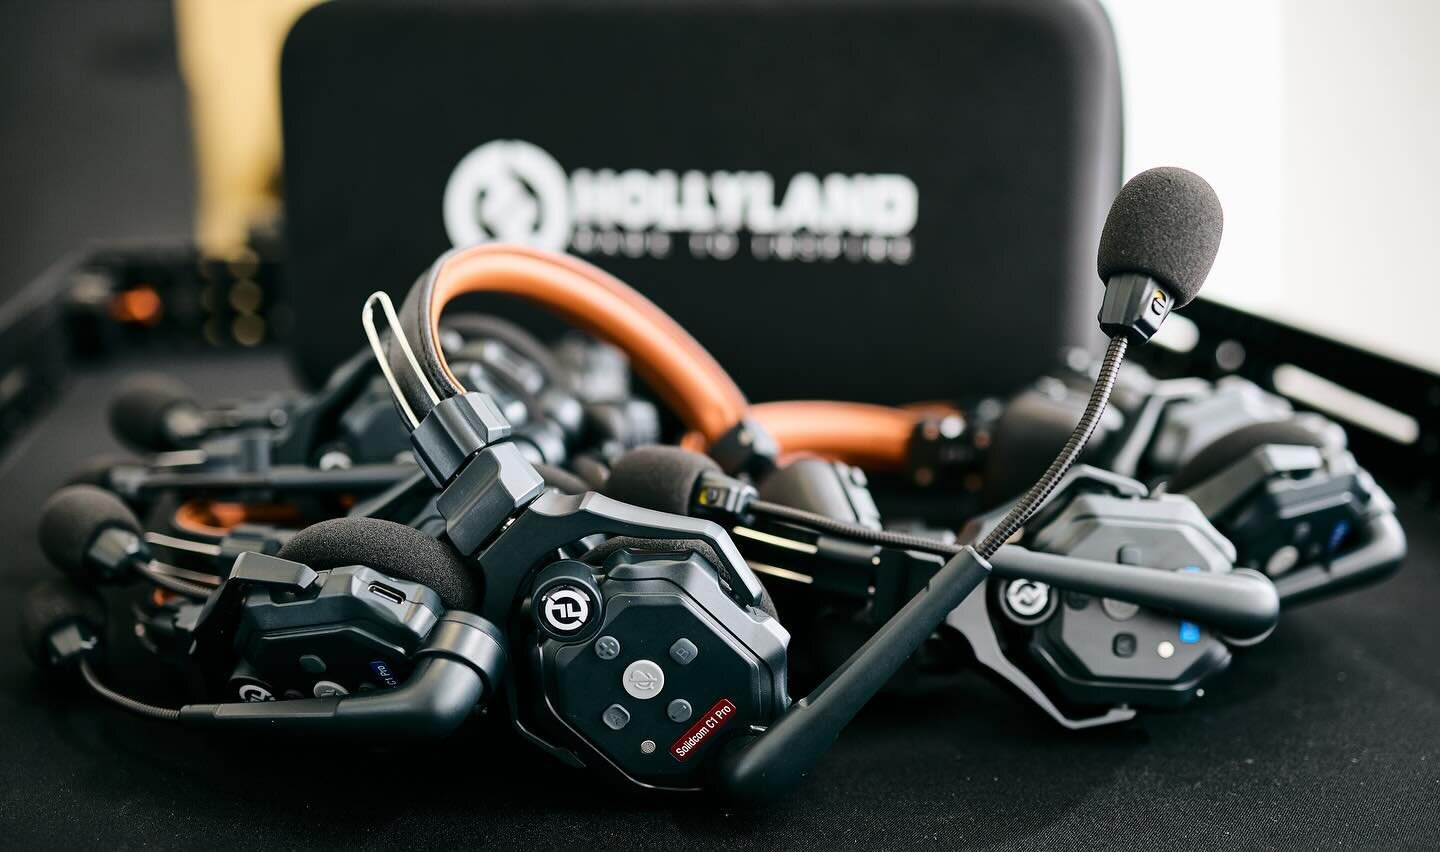 Our favorite comms - the Solidcom C1 Pro&rsquo;s.  Chose these over eartecs for better connection strength, range, ease of use, and battery life.  Available in a set of 8.  Thank you @mmsvisualsolutions for introducing these to us. 

#filmmaking #fil